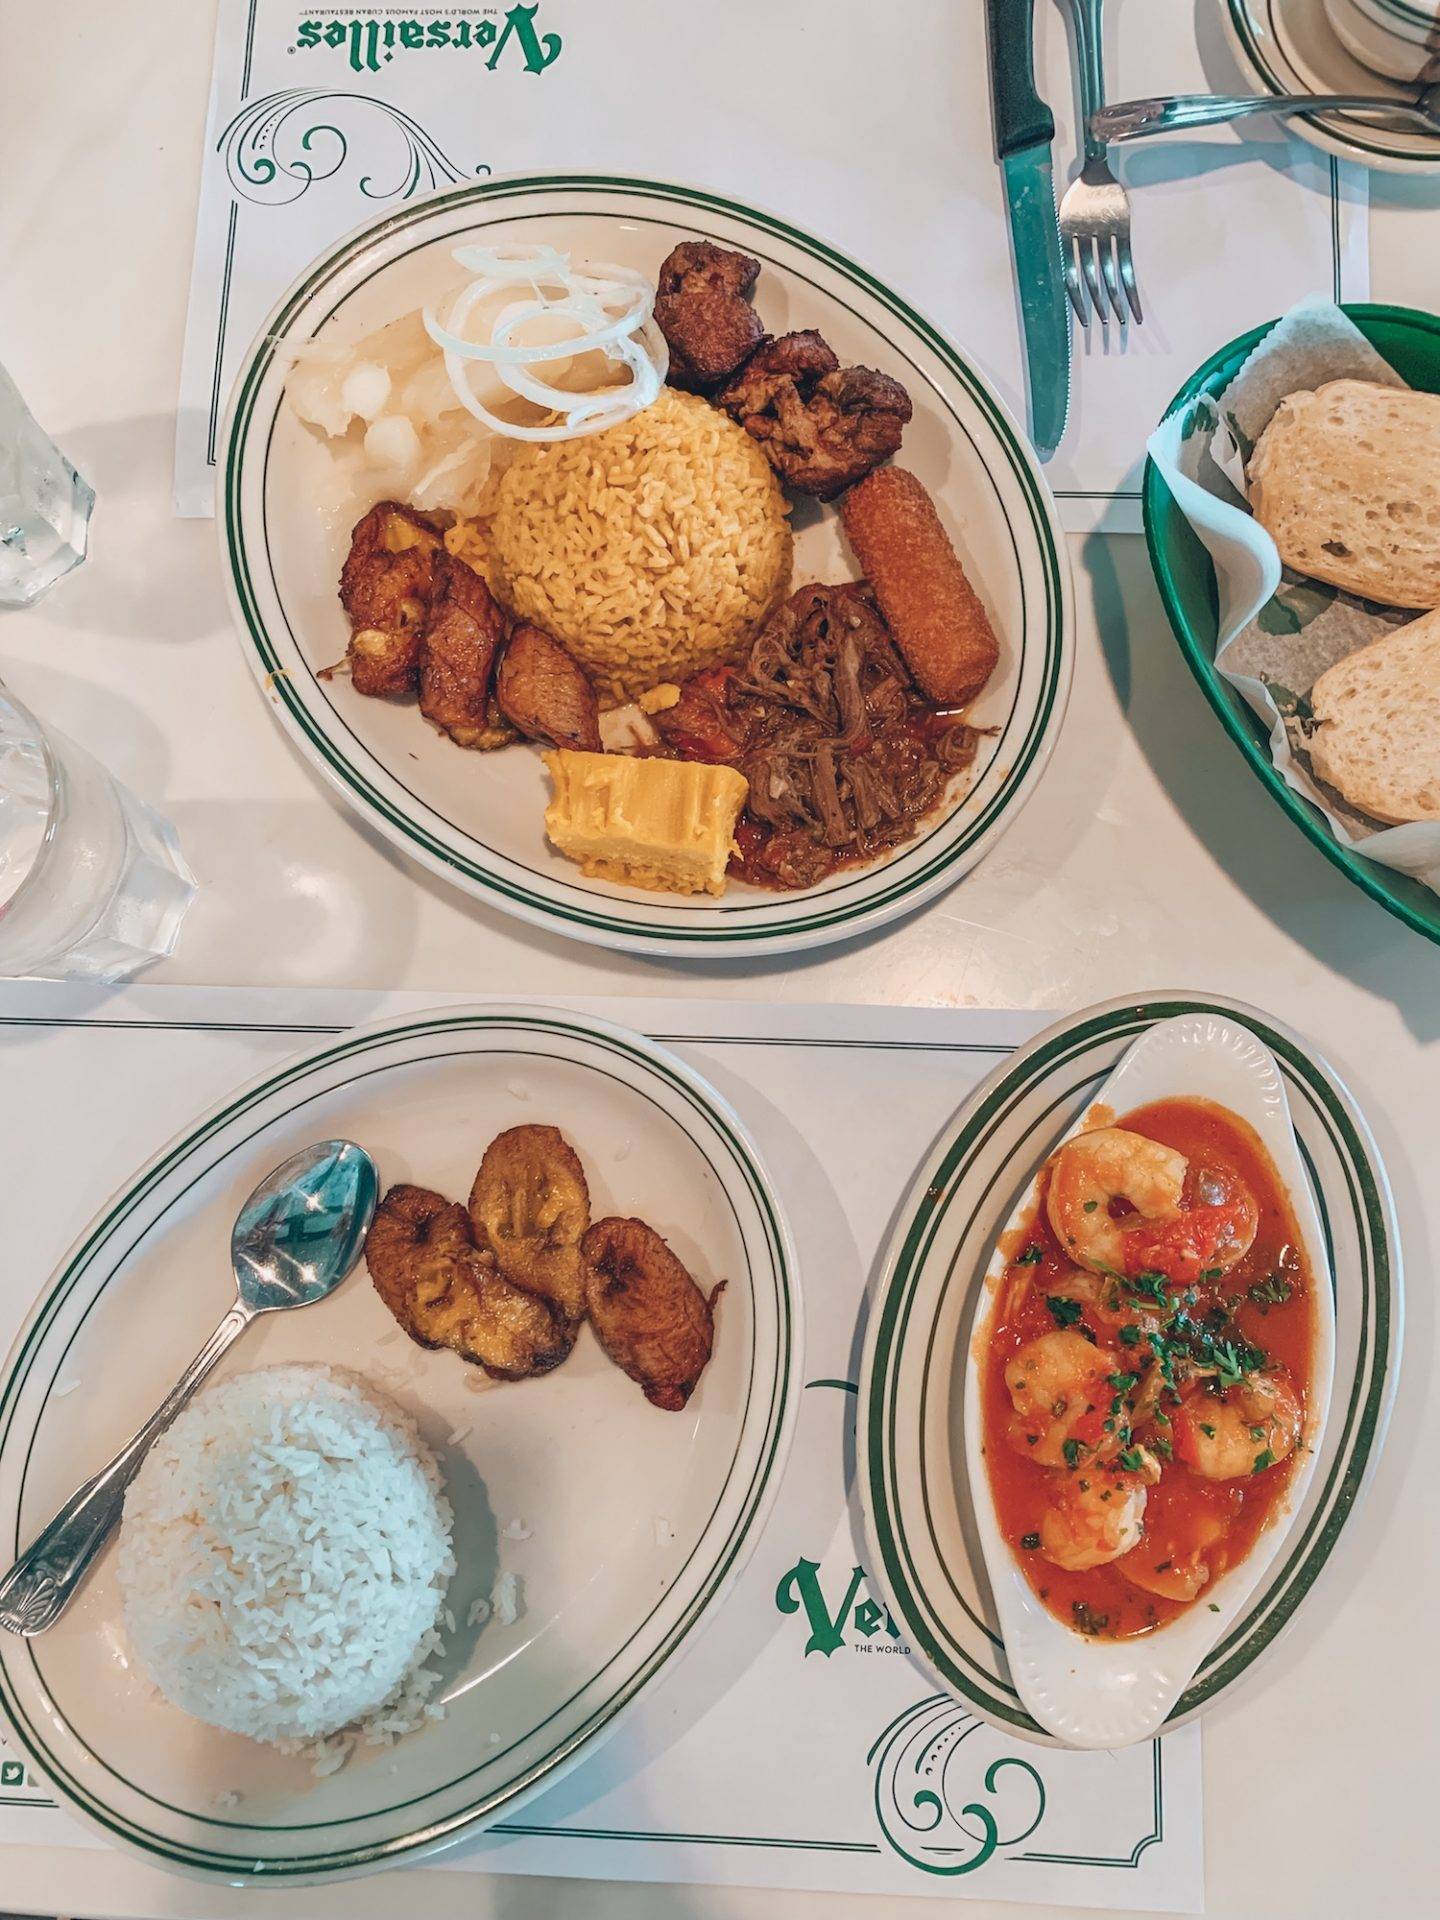 Versailles Restaurant in Little Havana offers the most authentic Cuban food